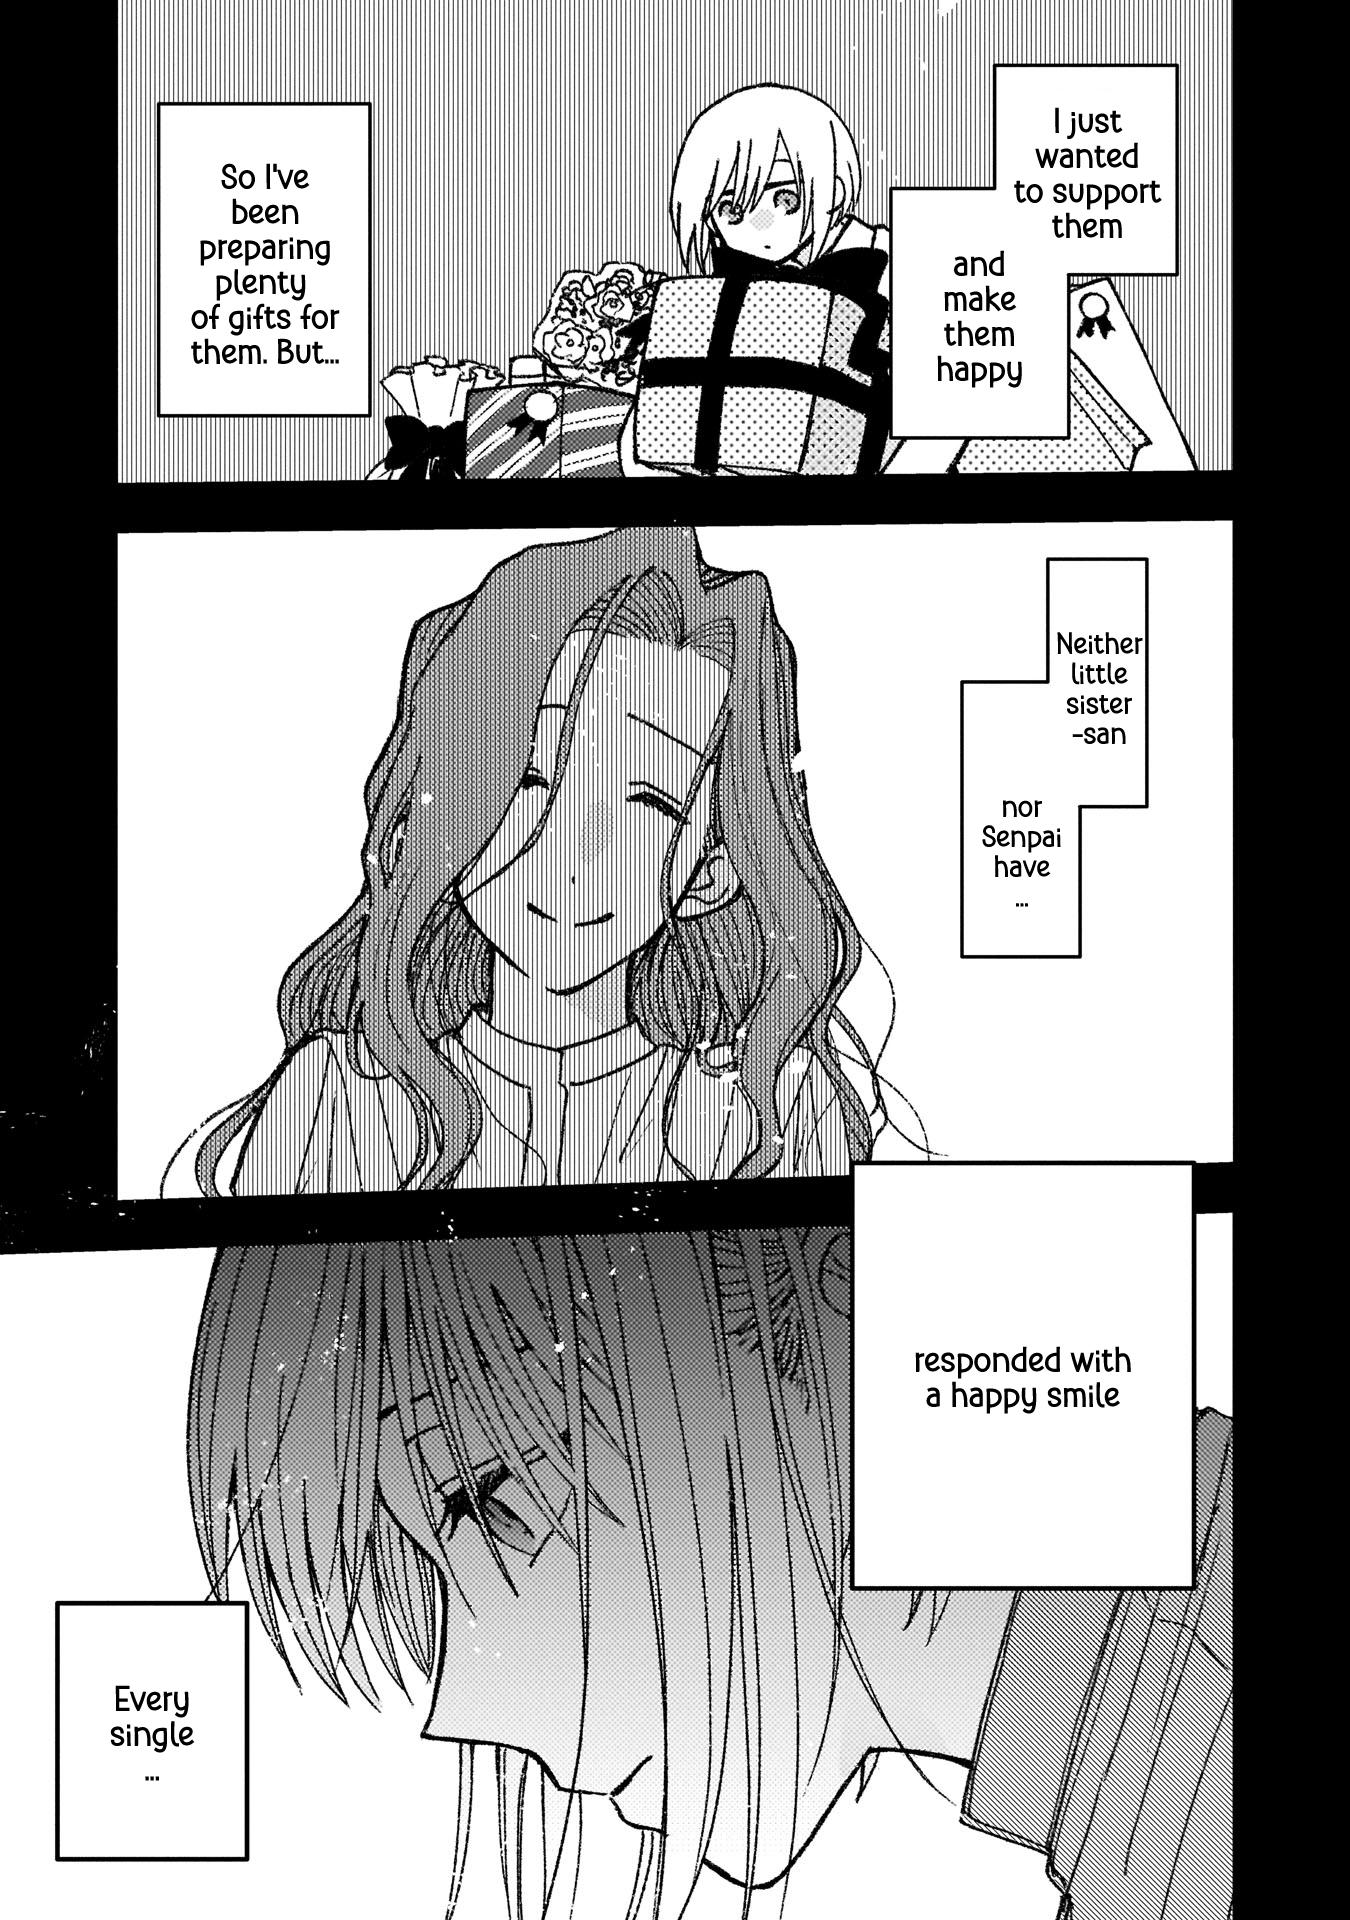 With Her Who Likes My Sister Vol.2 Ch.15 Page 3 - Mangago